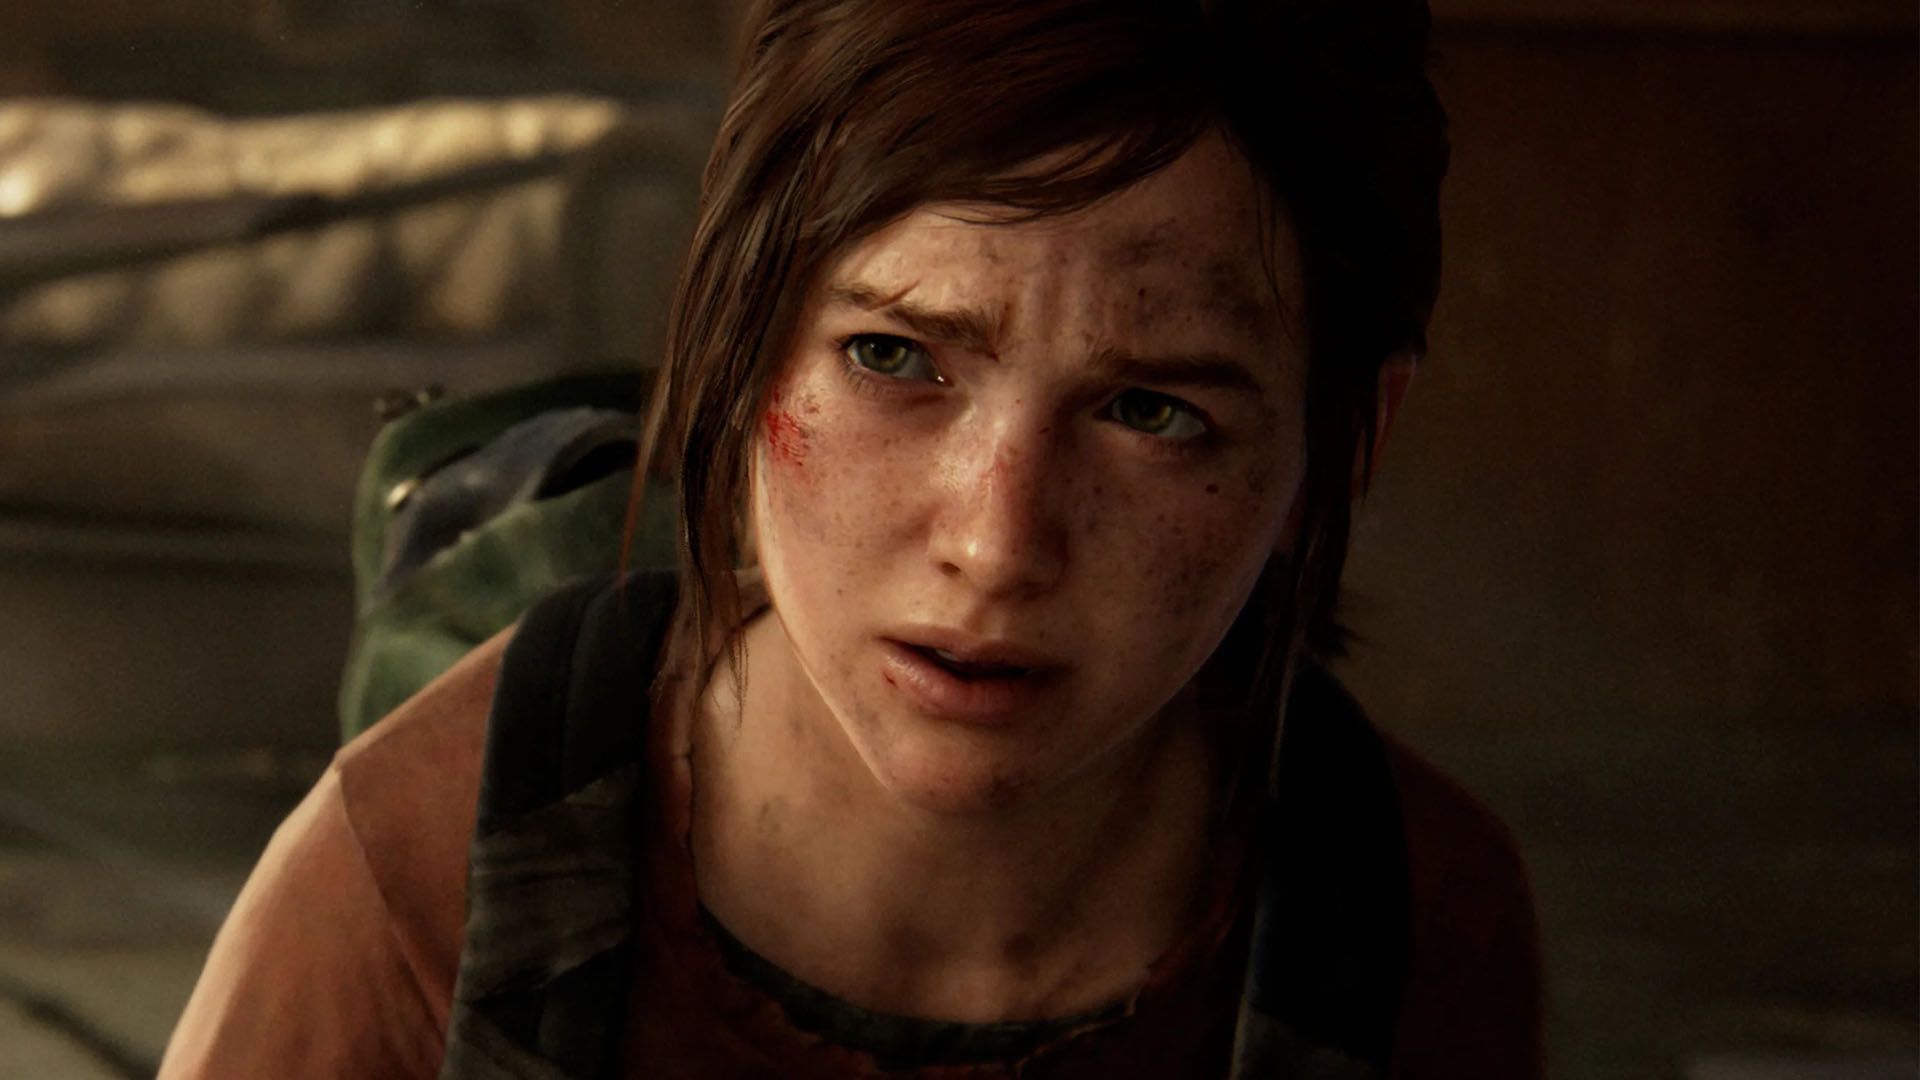 How The Last of Us Part 1 Advances Accessibility in Gaming